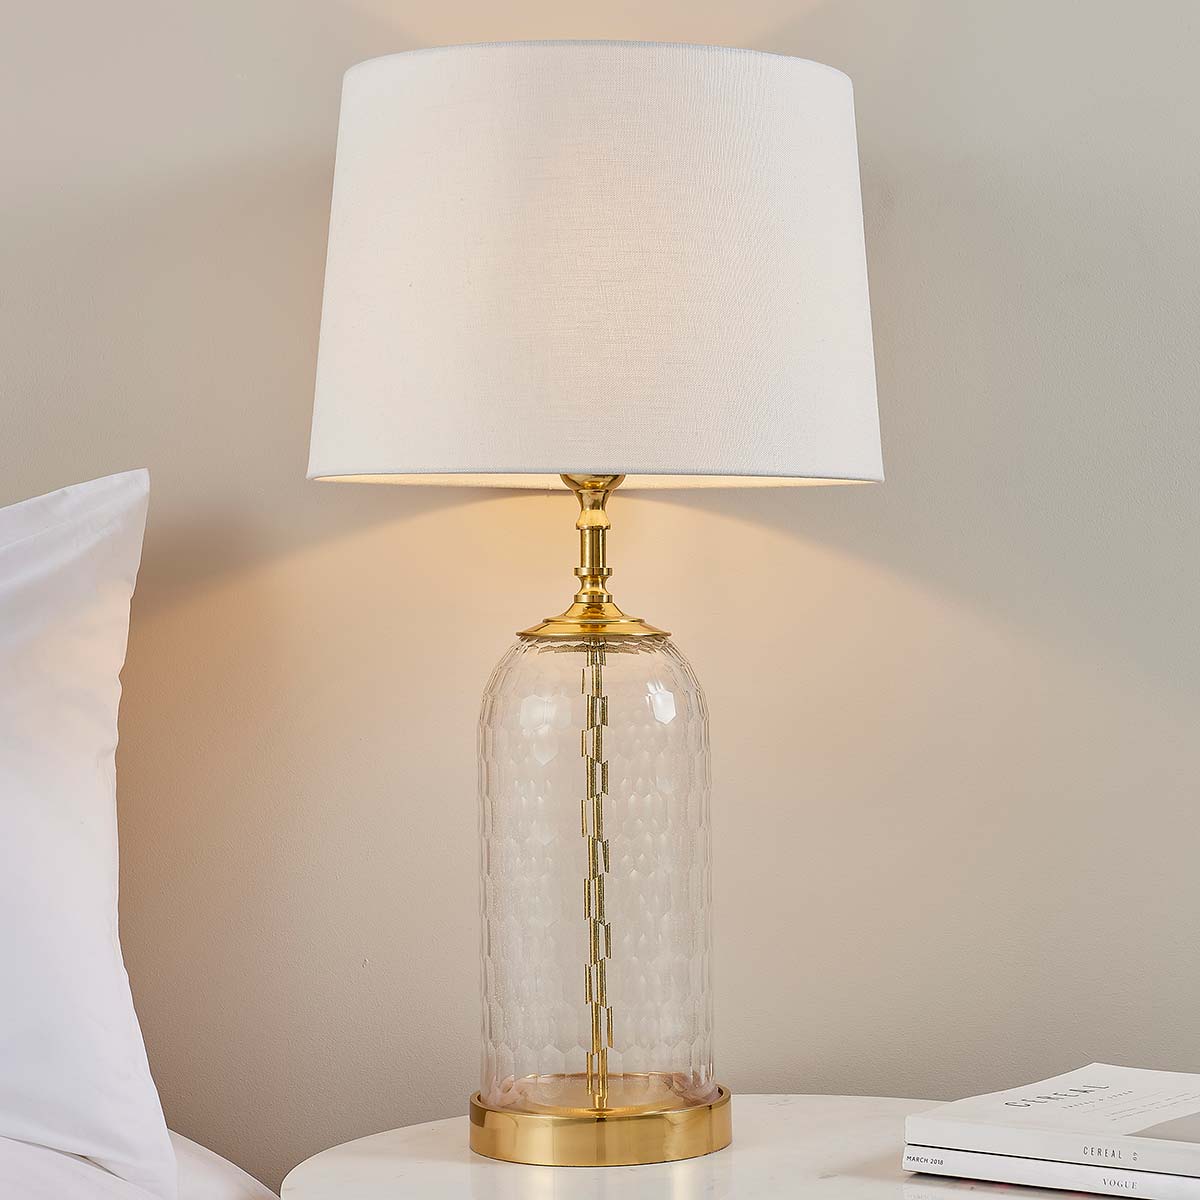 Wistow Cut Glass Table Lamp Solid Brass White Linen Shade